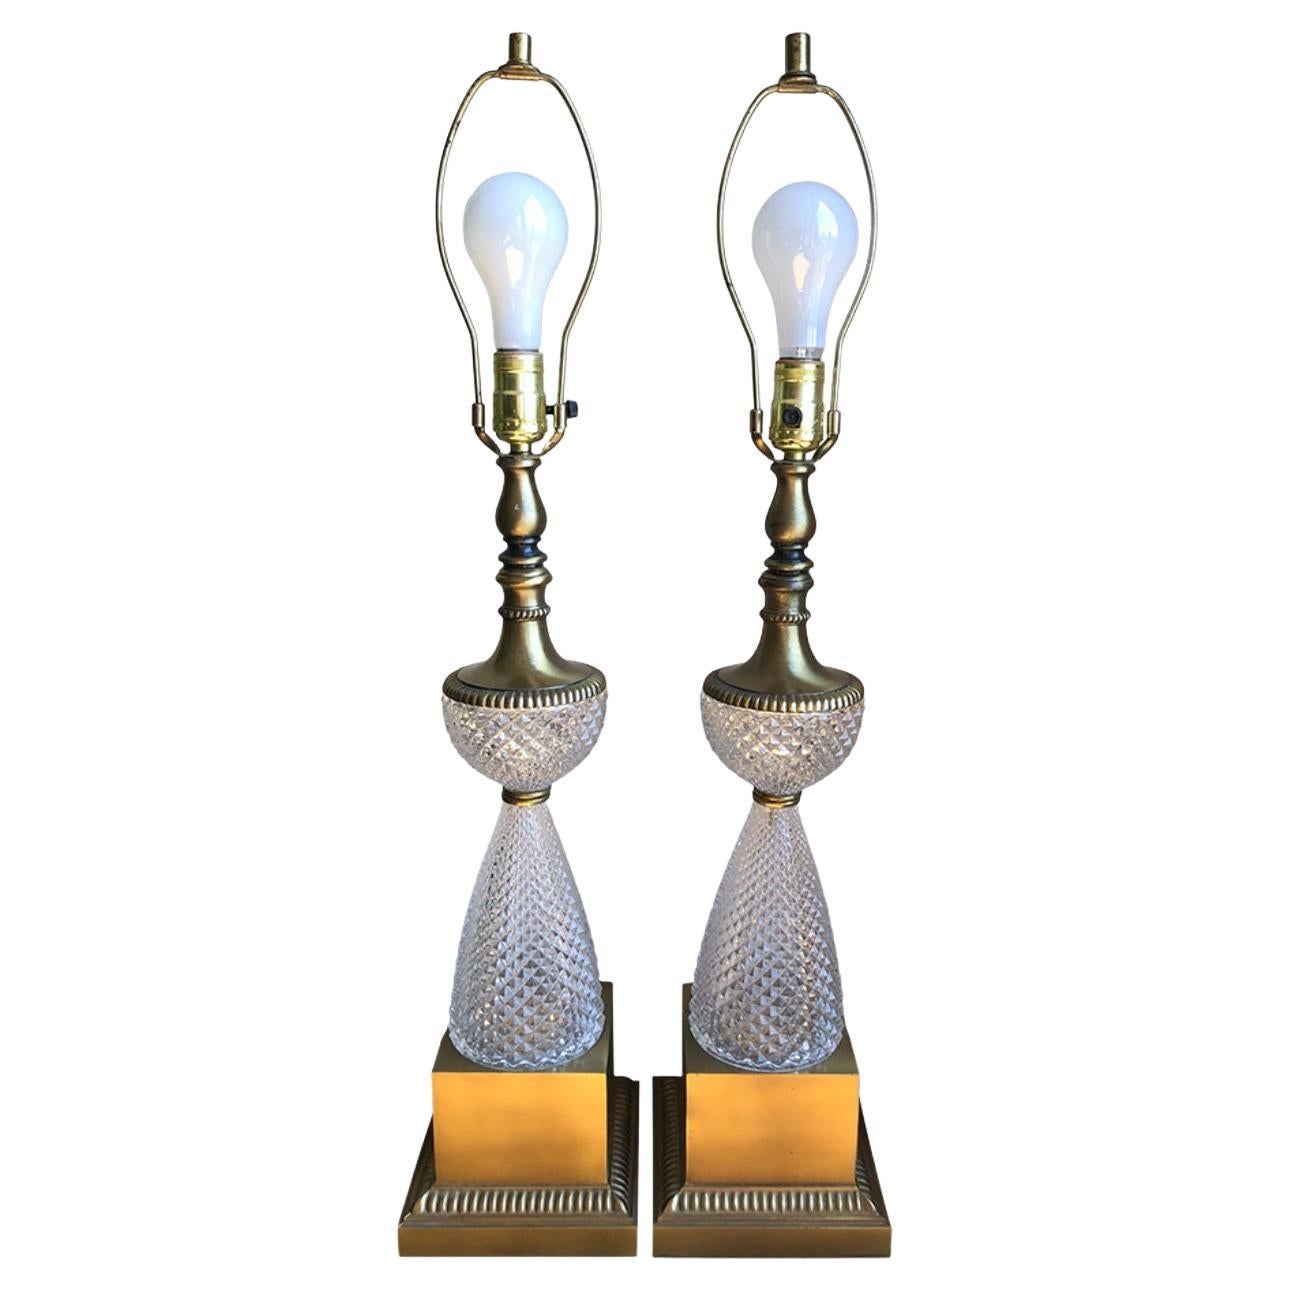 1960s Italian Lead Crystal Brass Lamps, a Pair For Sale